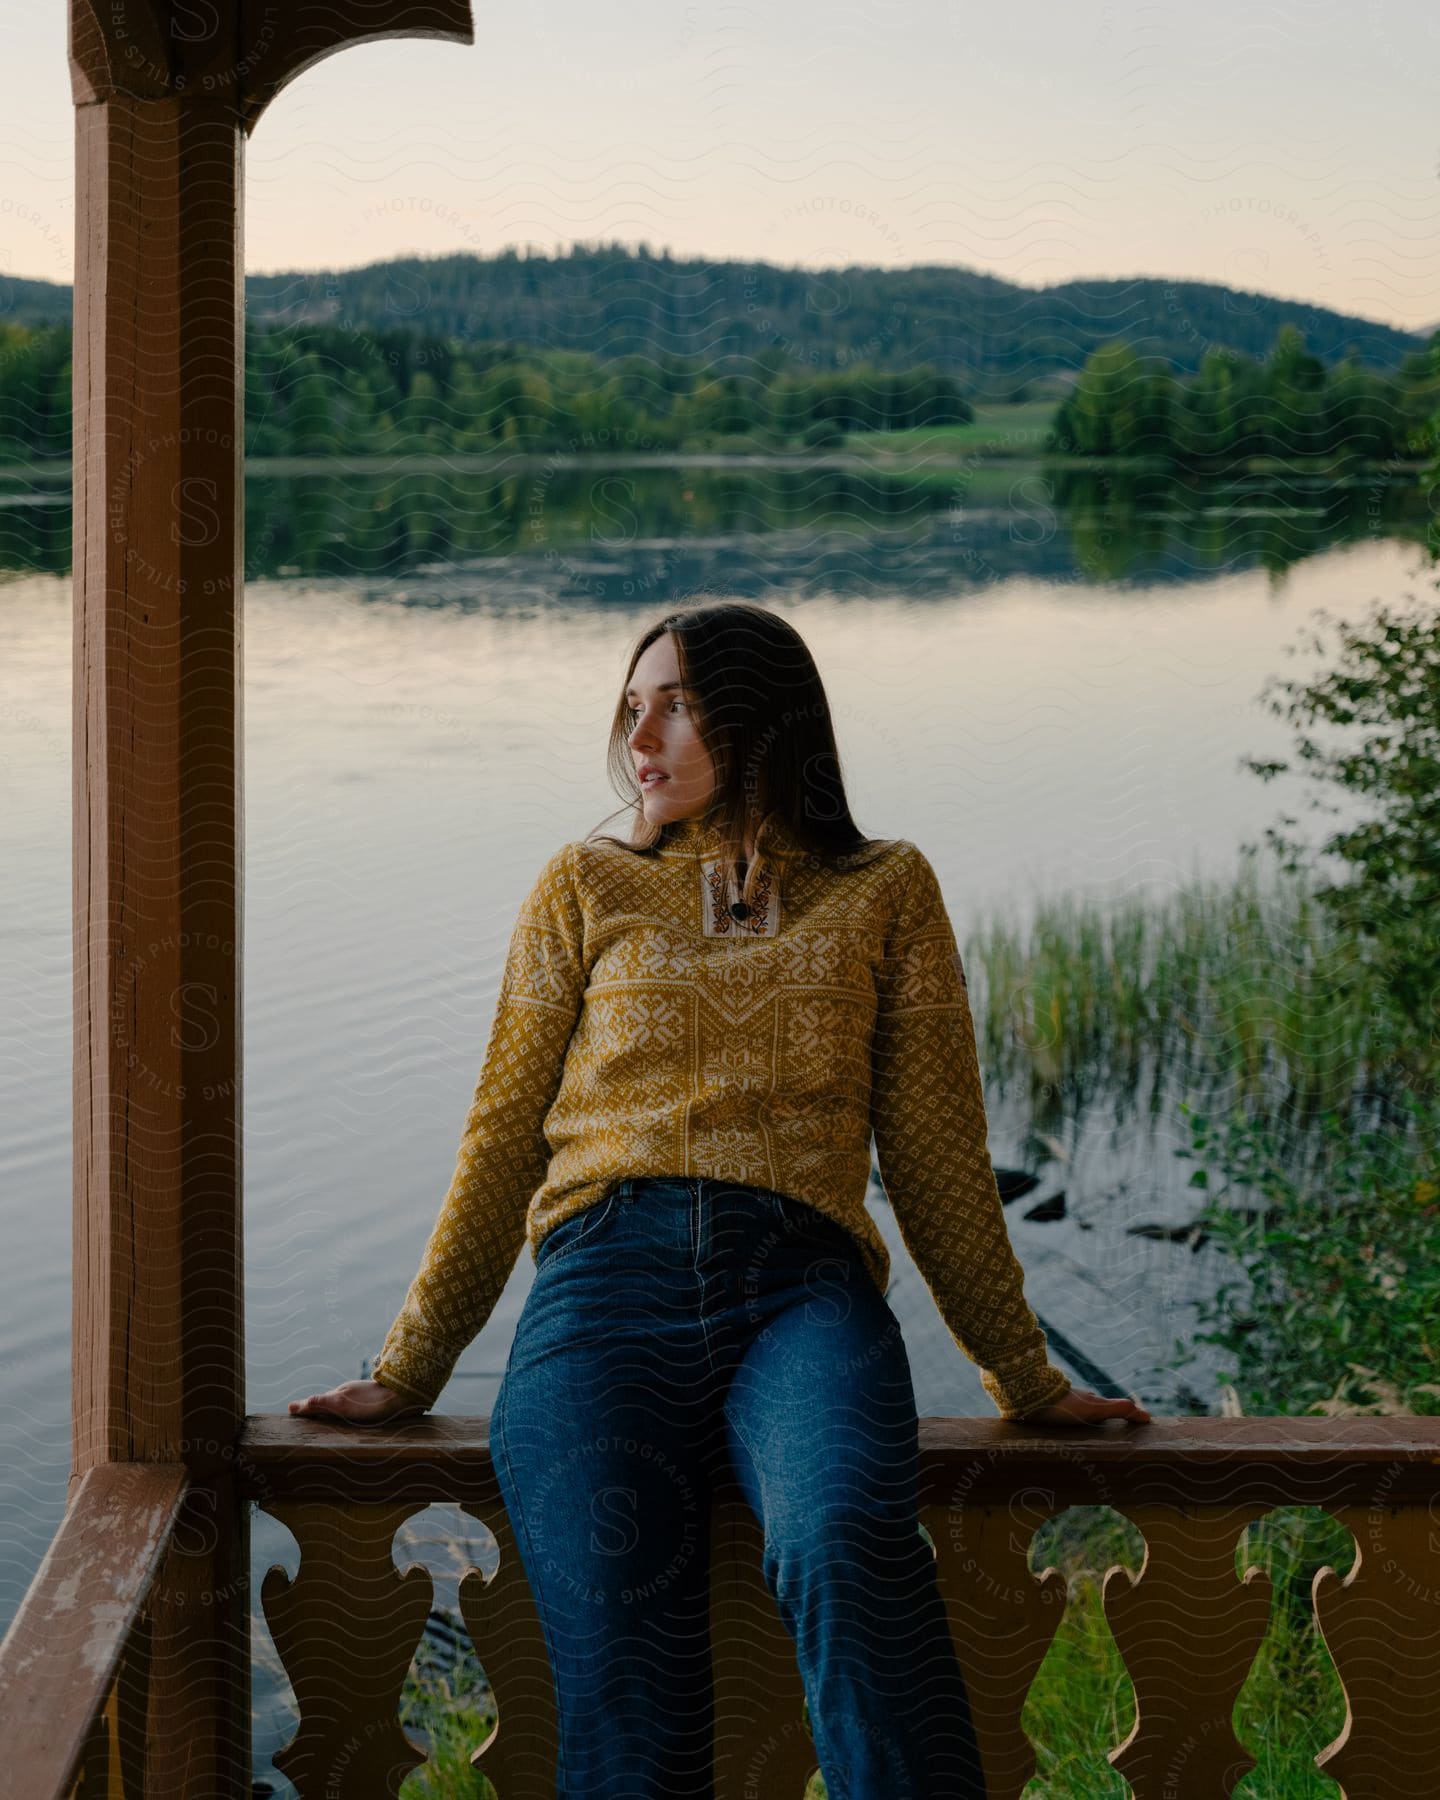 A woman posing outdoors in front of a lake sitting on a railing